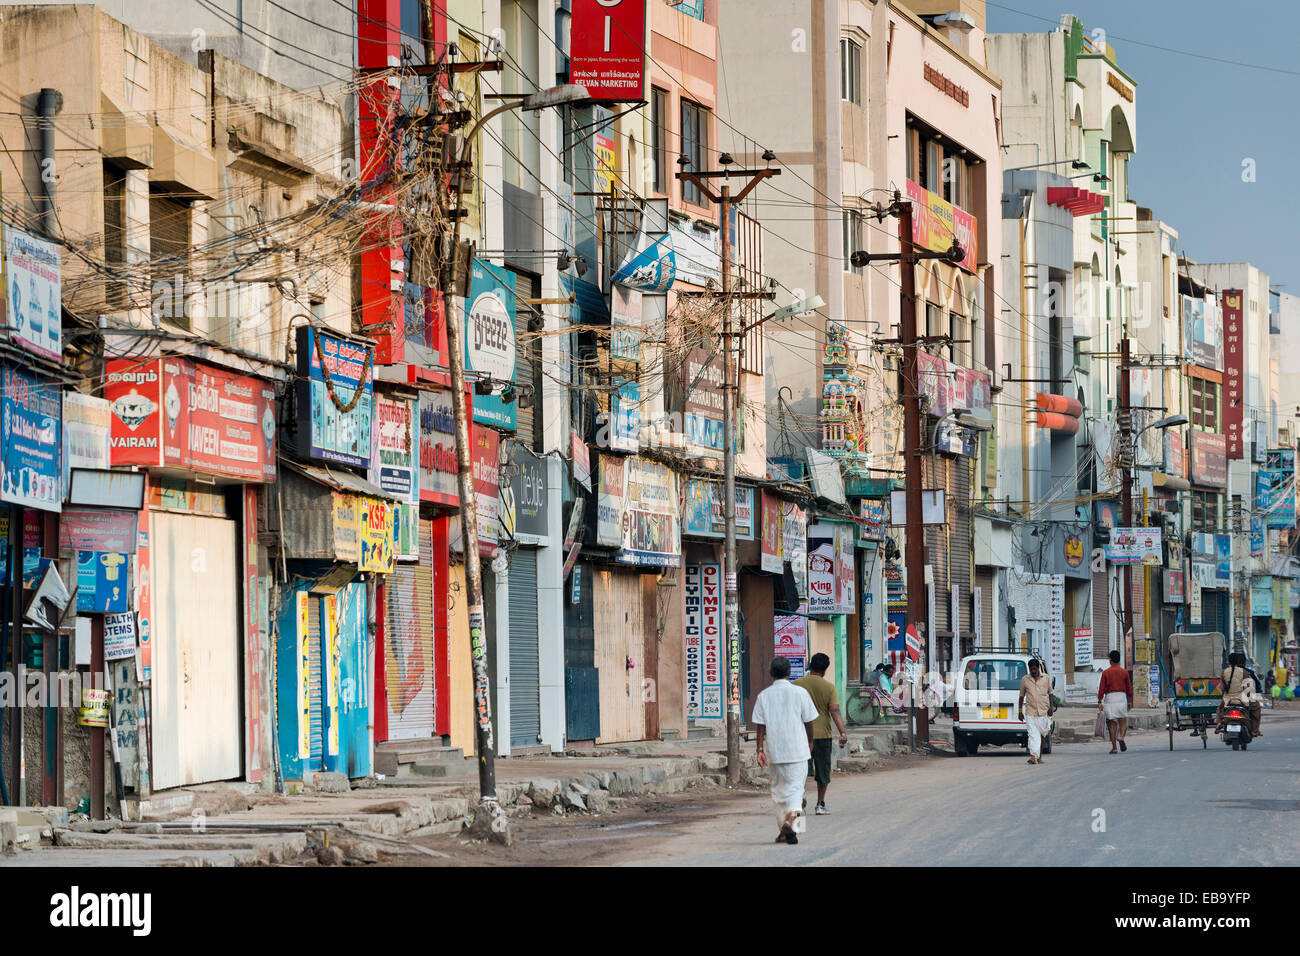 Storefront with billboards, street in city centre, Madurai, Tamil Nadu, India Stock Photo